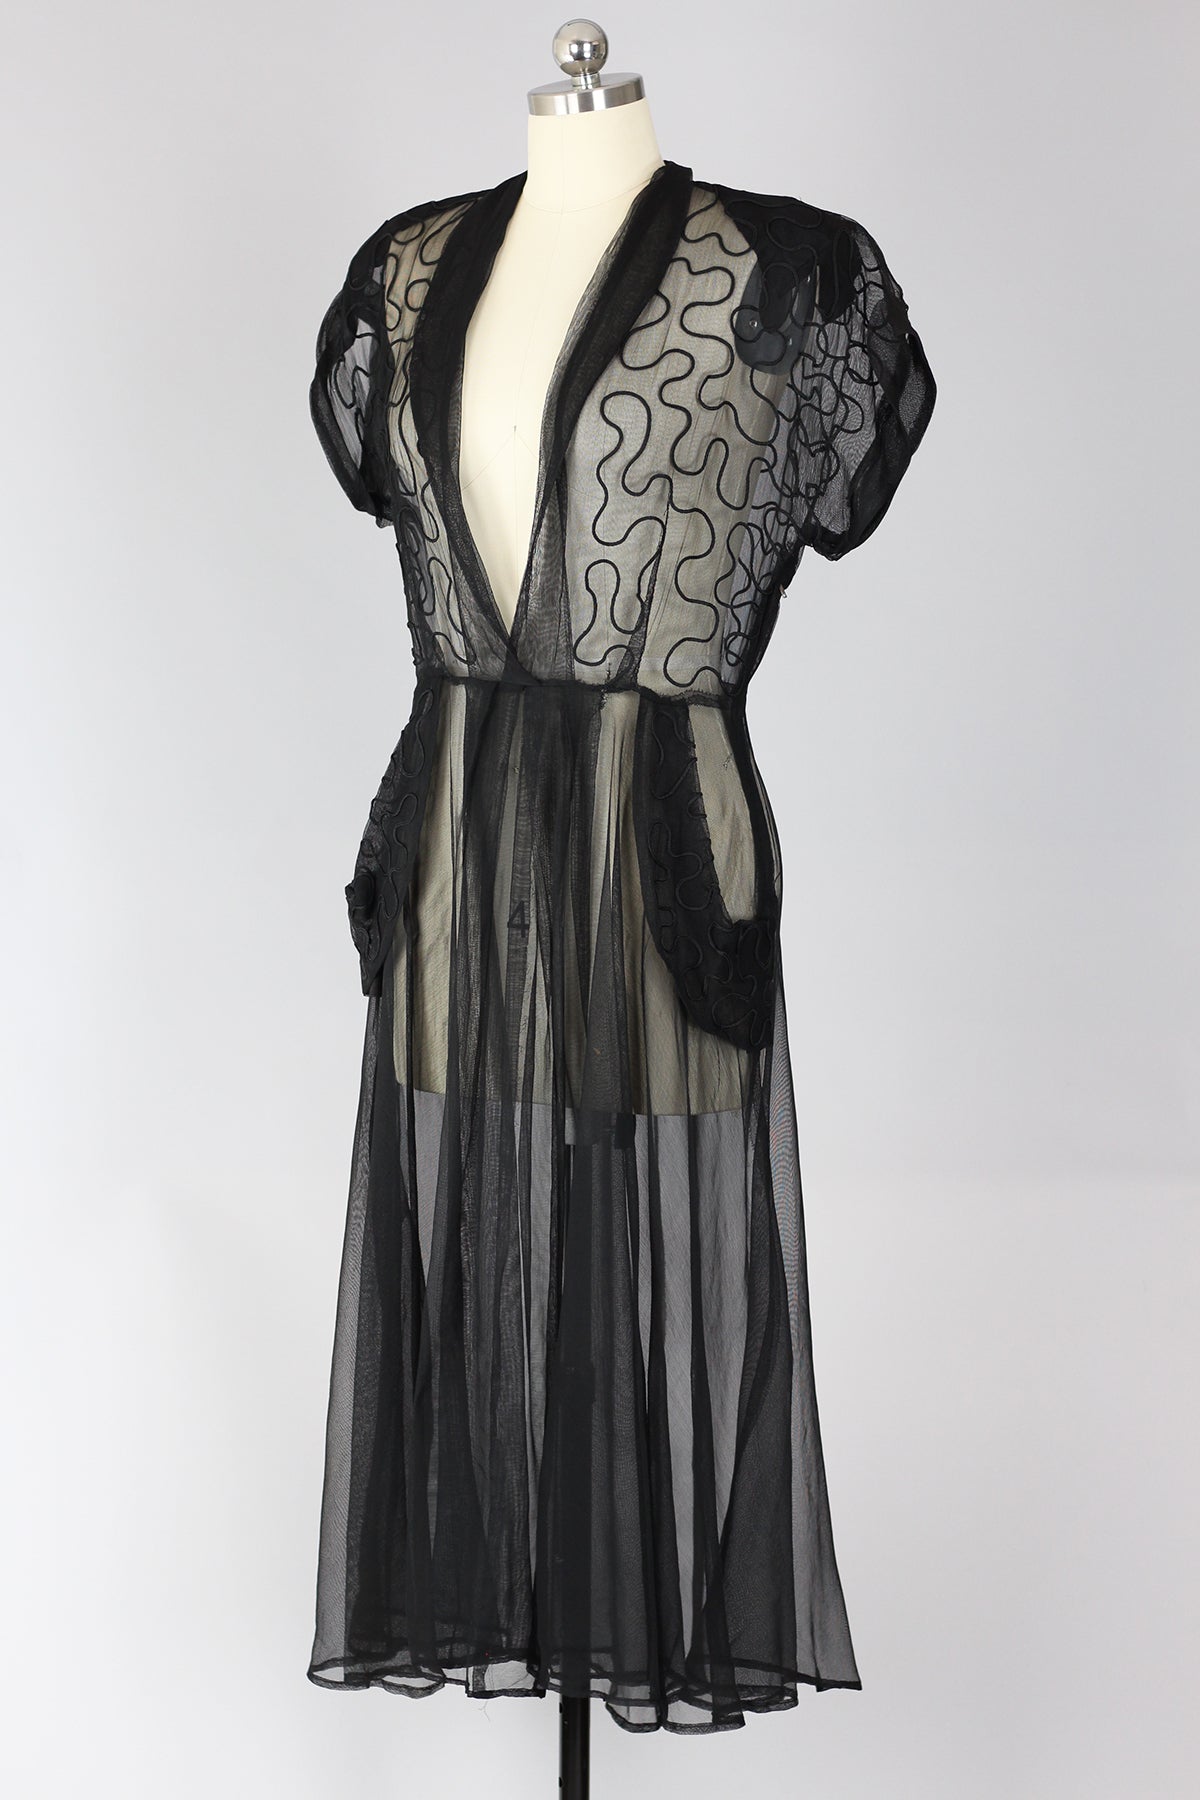 Rare 1940s Black Sheer Tulle Dress with Soutache Detail